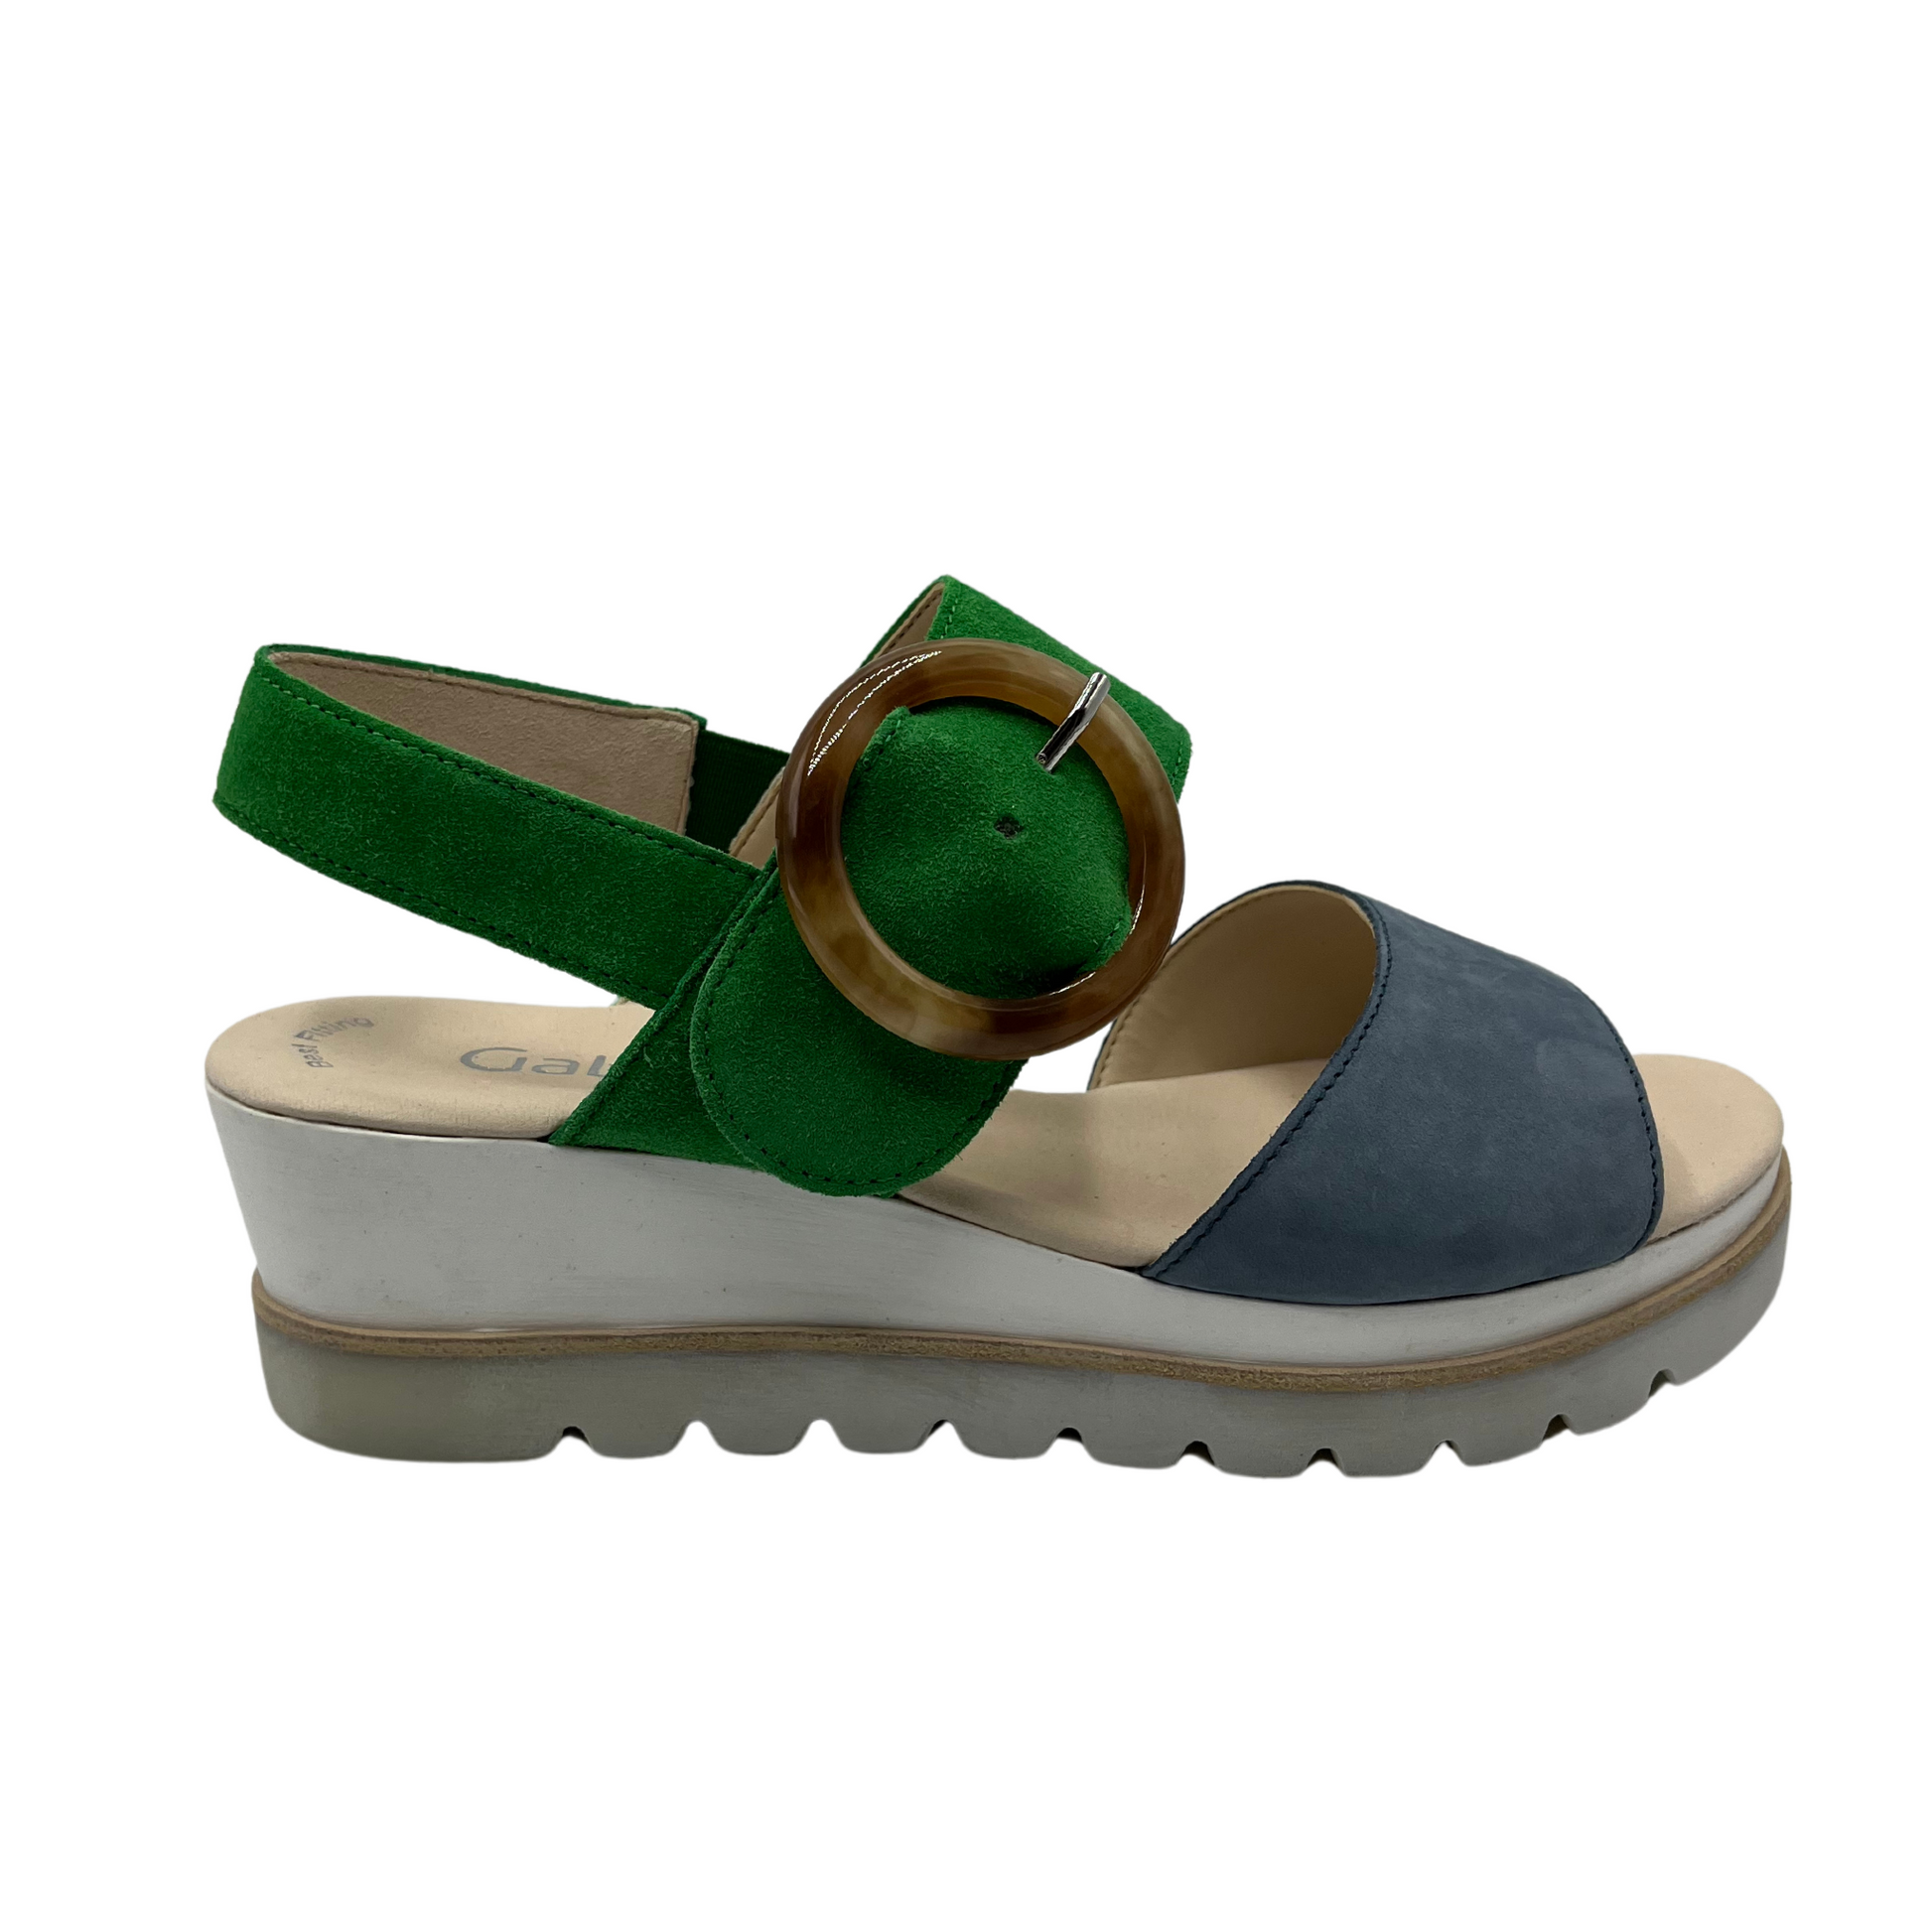 Right facing view of green and blue wedge sandal with round buckle strap and open toe